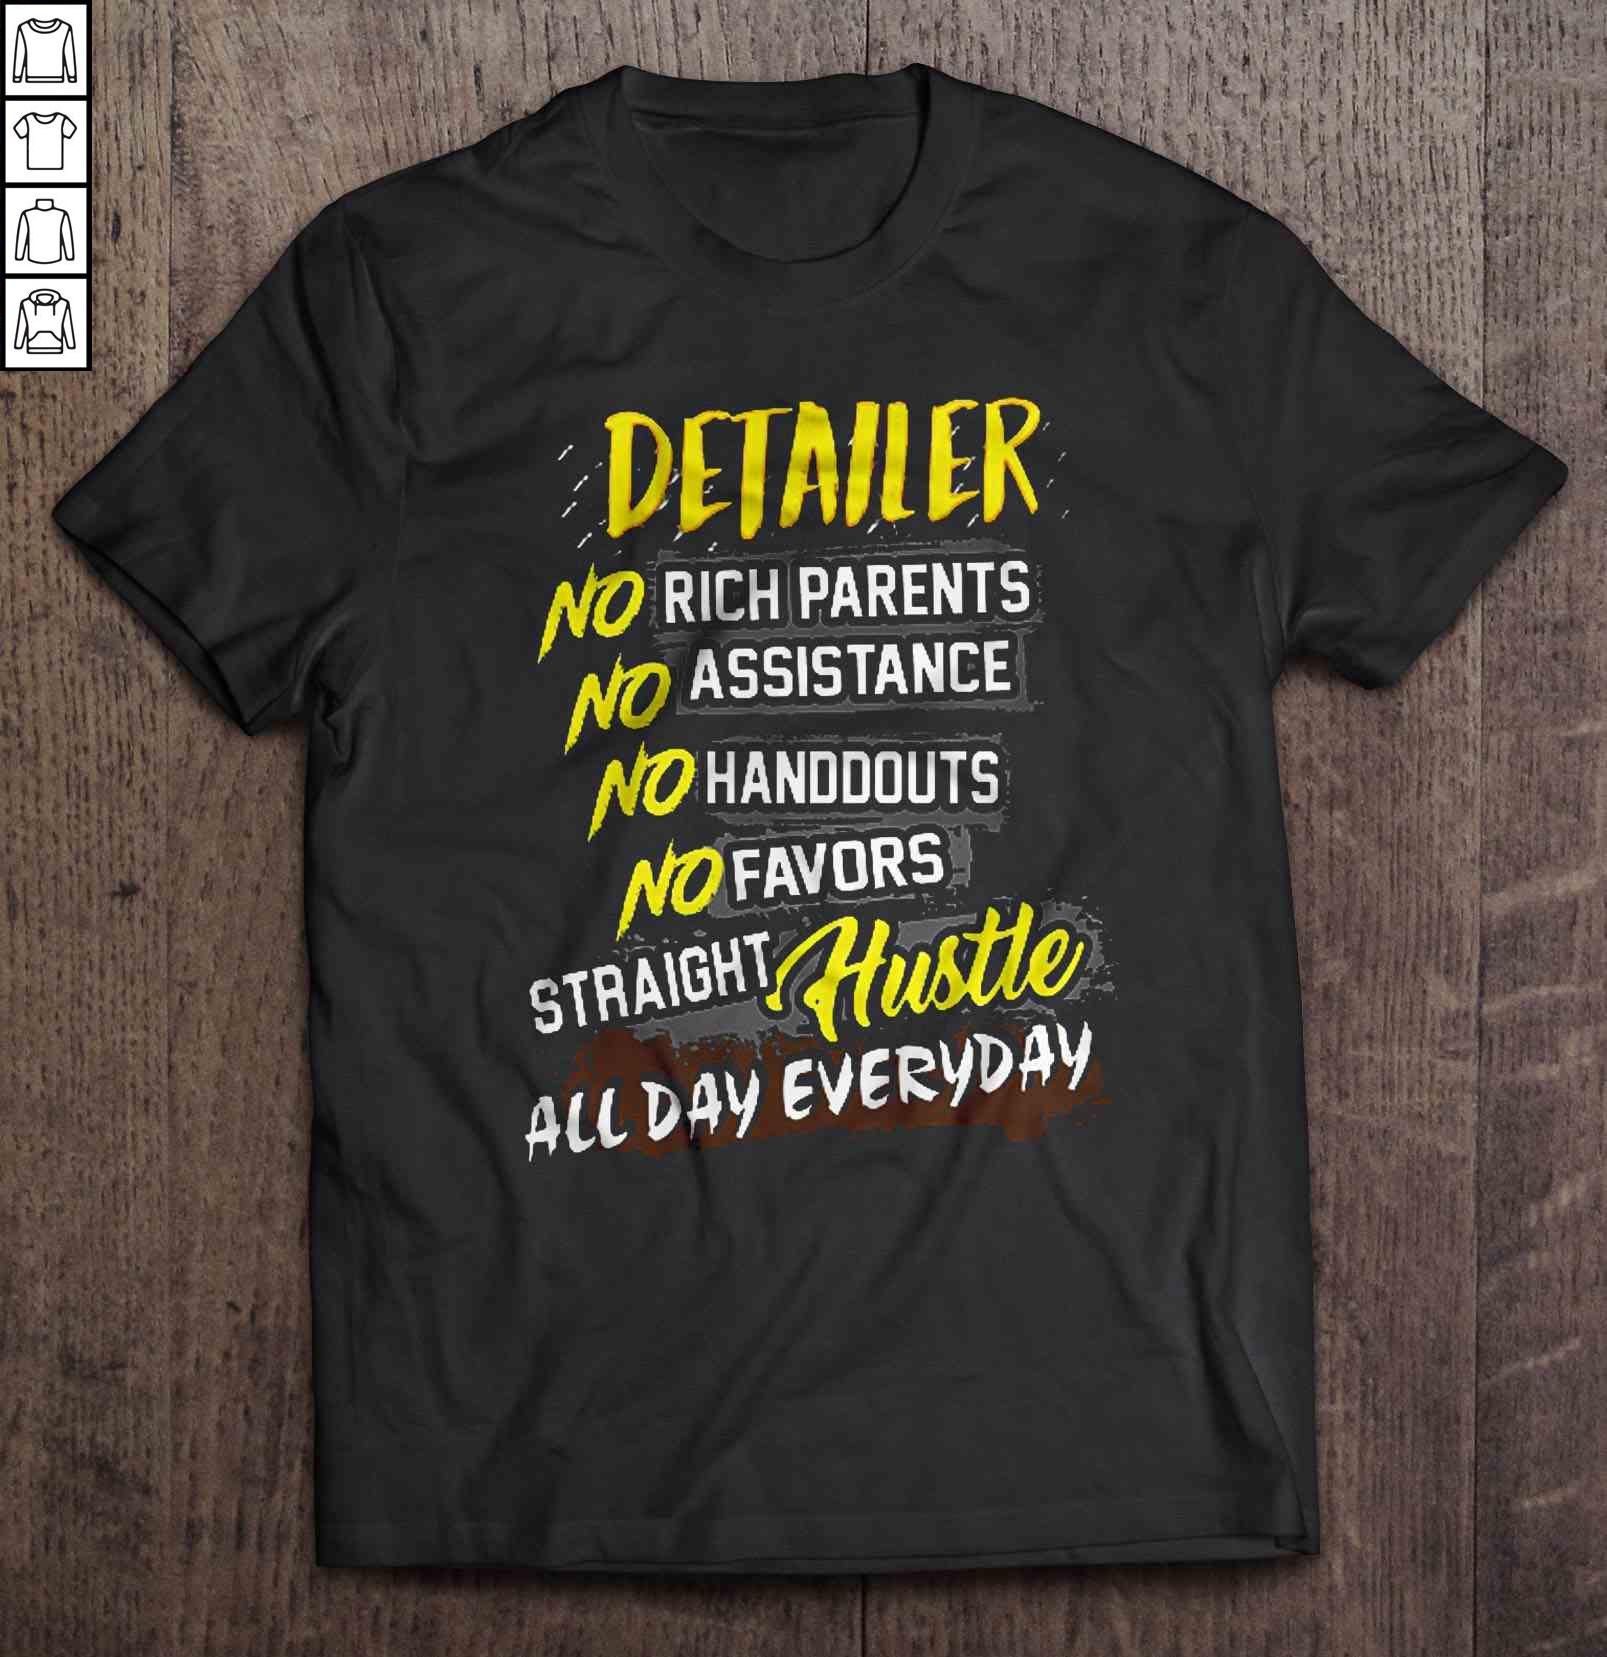 Detailer No Rich Parents No Assistance No Handouts No Favors Straight Hustle All Day Everyday TShirt